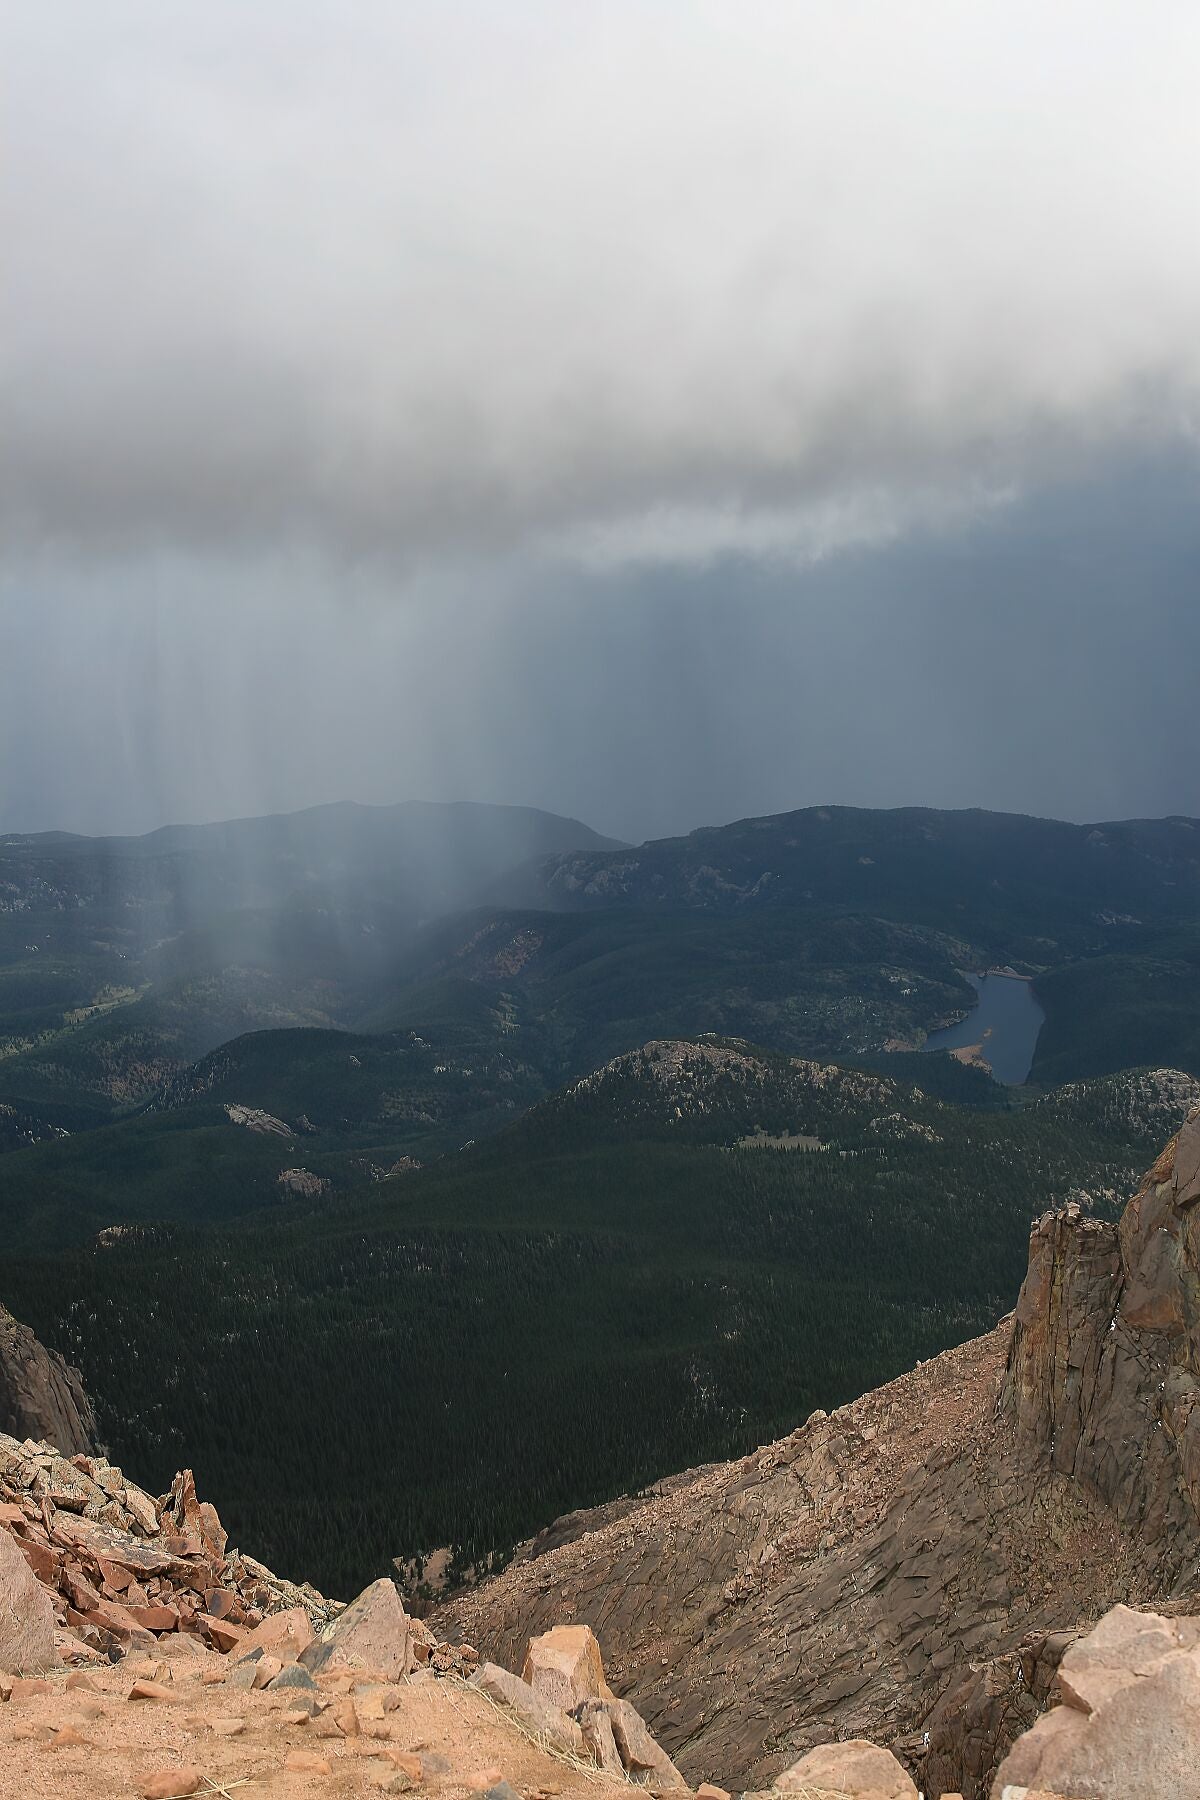 Dramatic view from the top of the Rocky Mountains